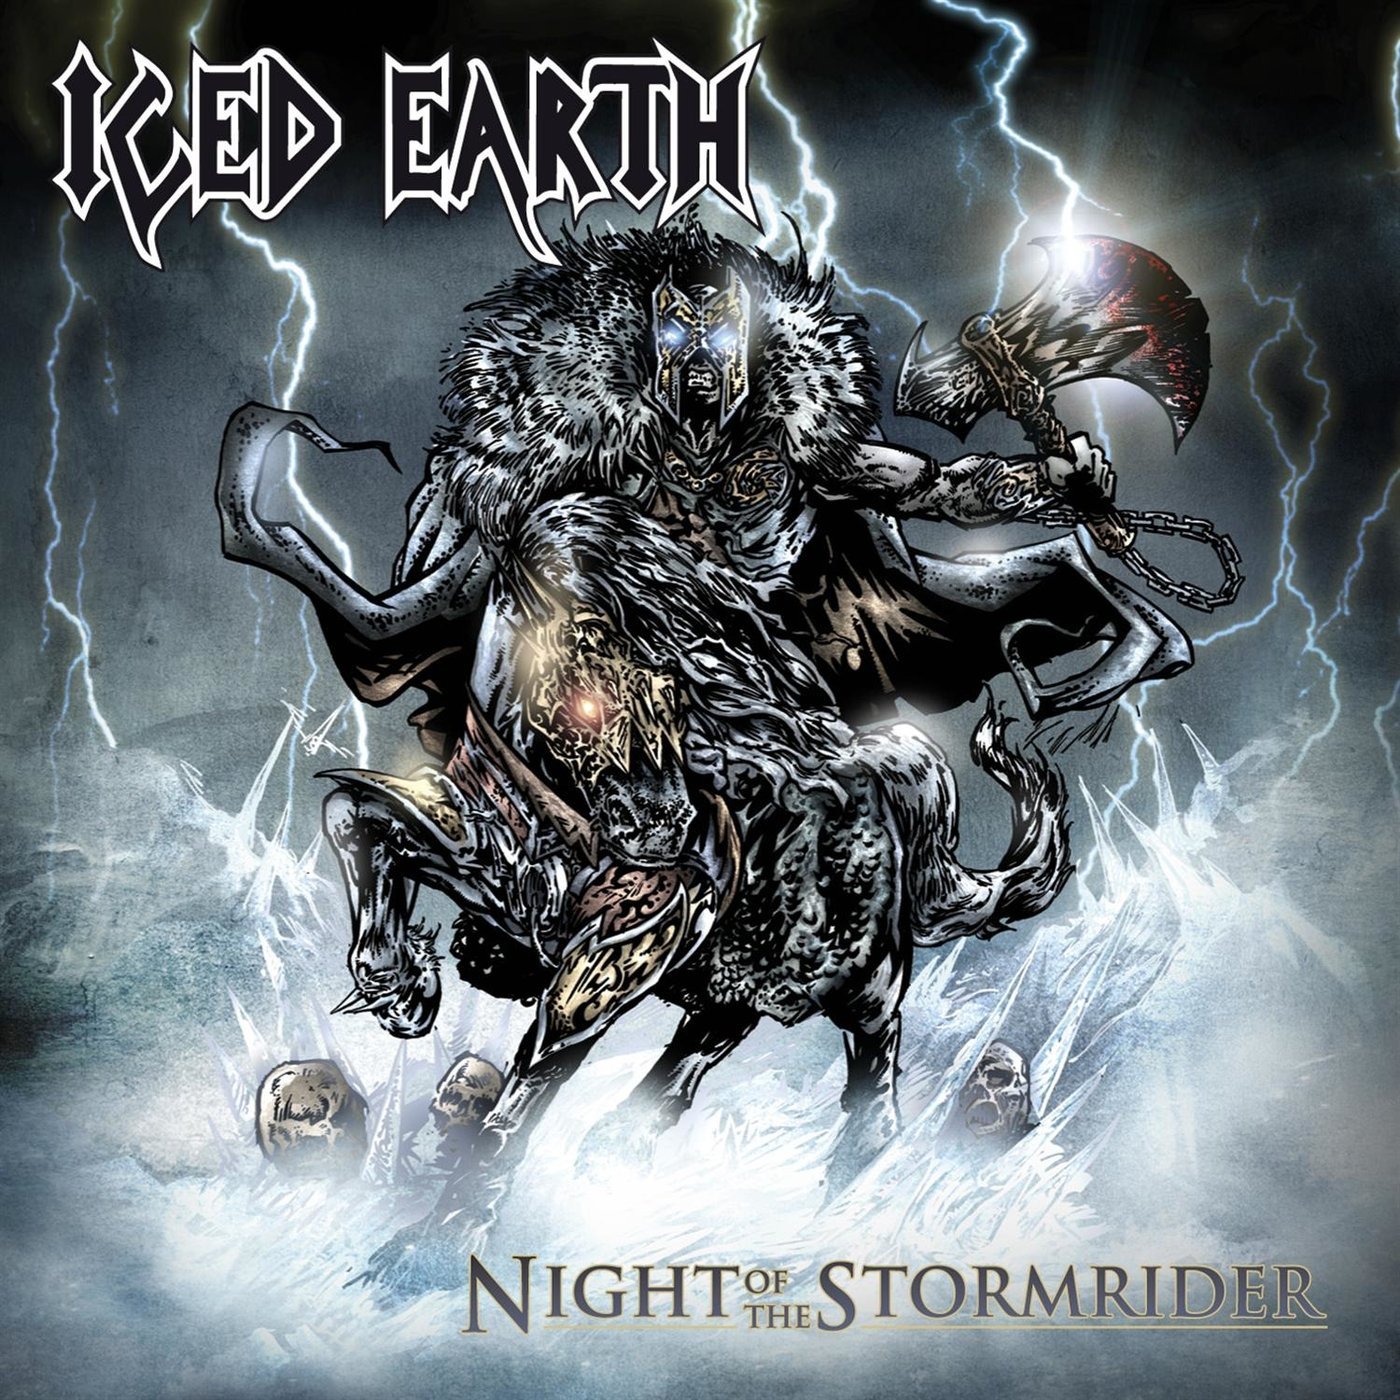 Iced Earth - Night Of The Stormrider (Reissue) (Music CD)